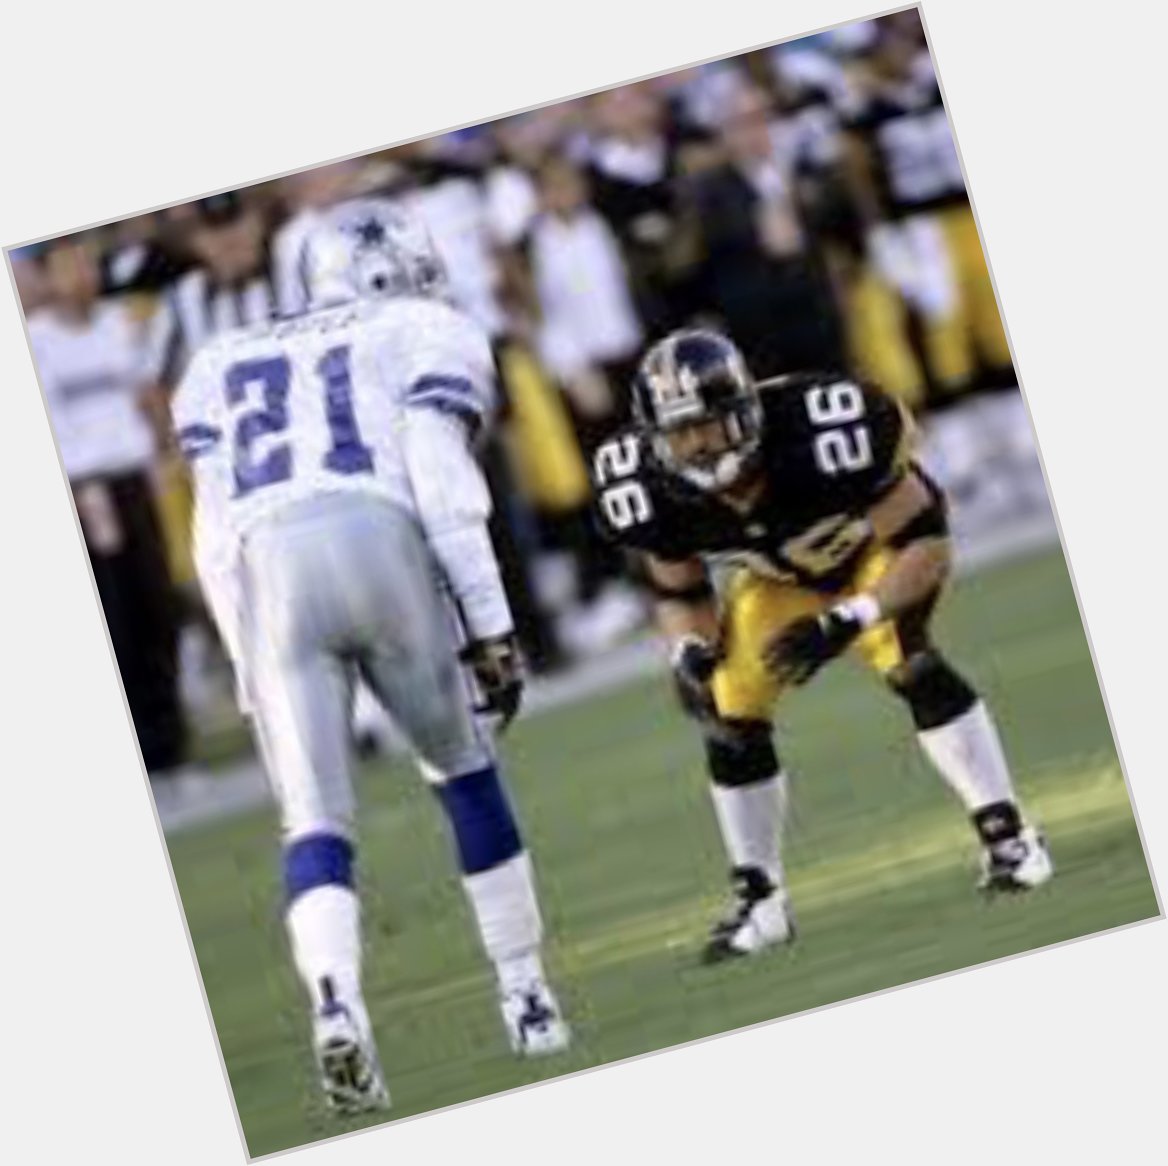 Happy Birthday Rod Woodson. Sorry bout Neil throwing away a Super Bowl you should have won. 